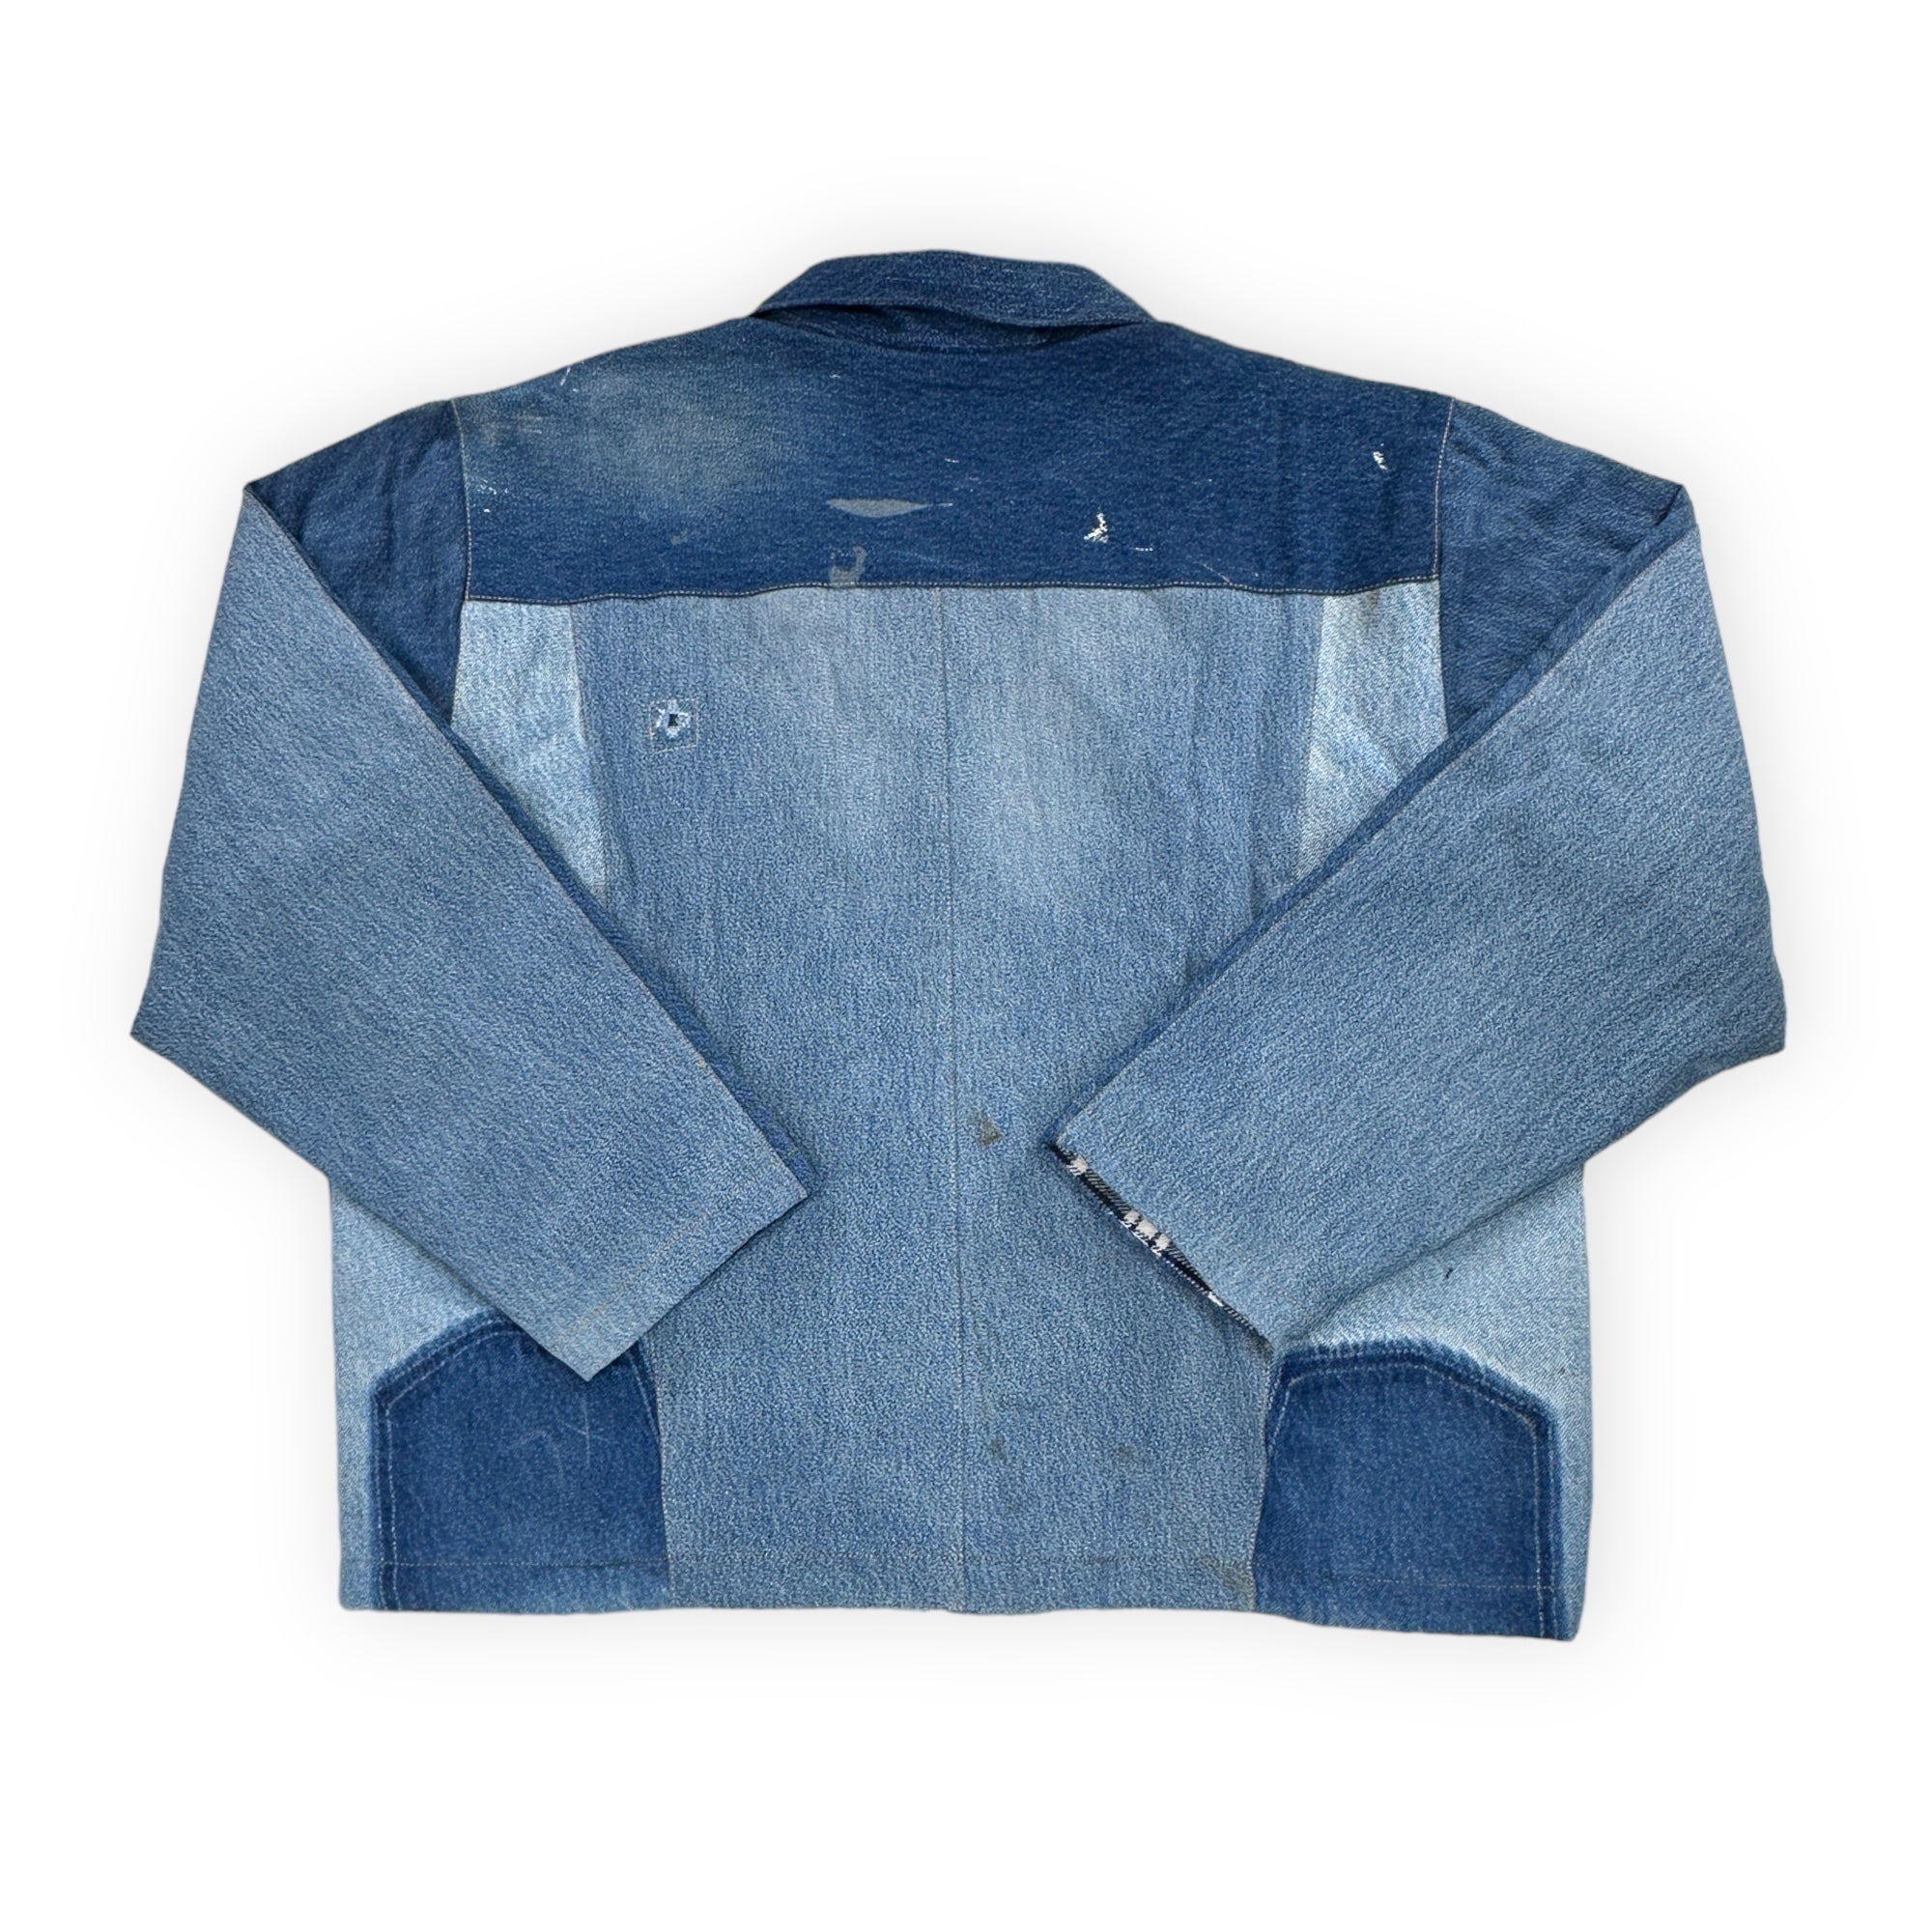 Men's Chore Coat Made From Upcycled Work Jeans - XL-2